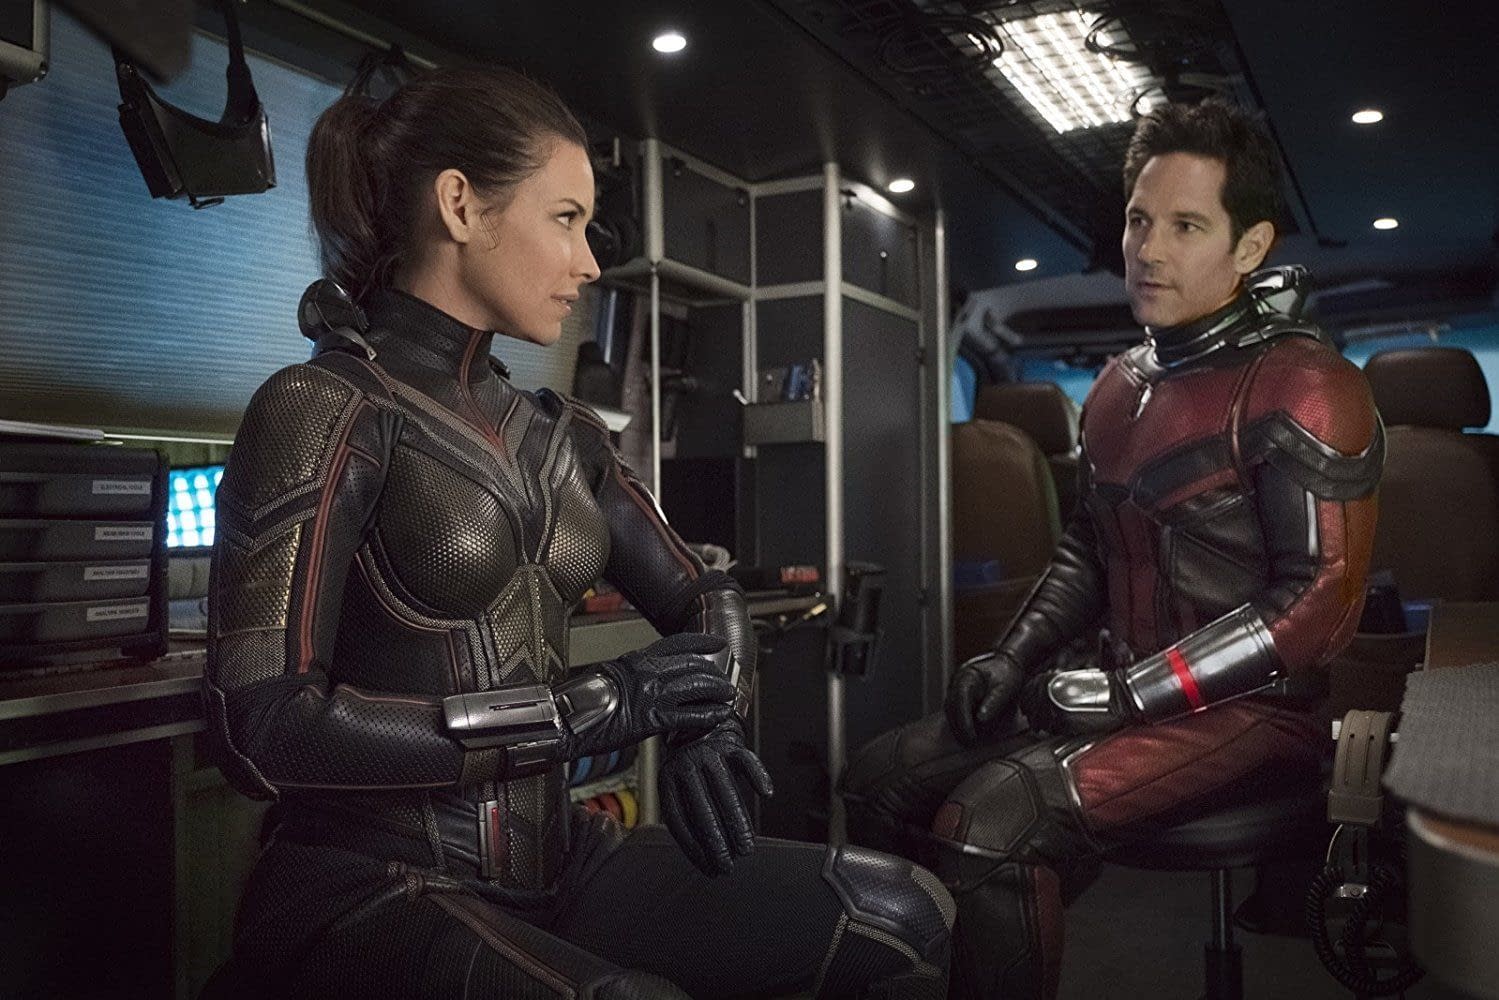 Ant-Man and the Wasp Eyeing a $75M Opening Weekend